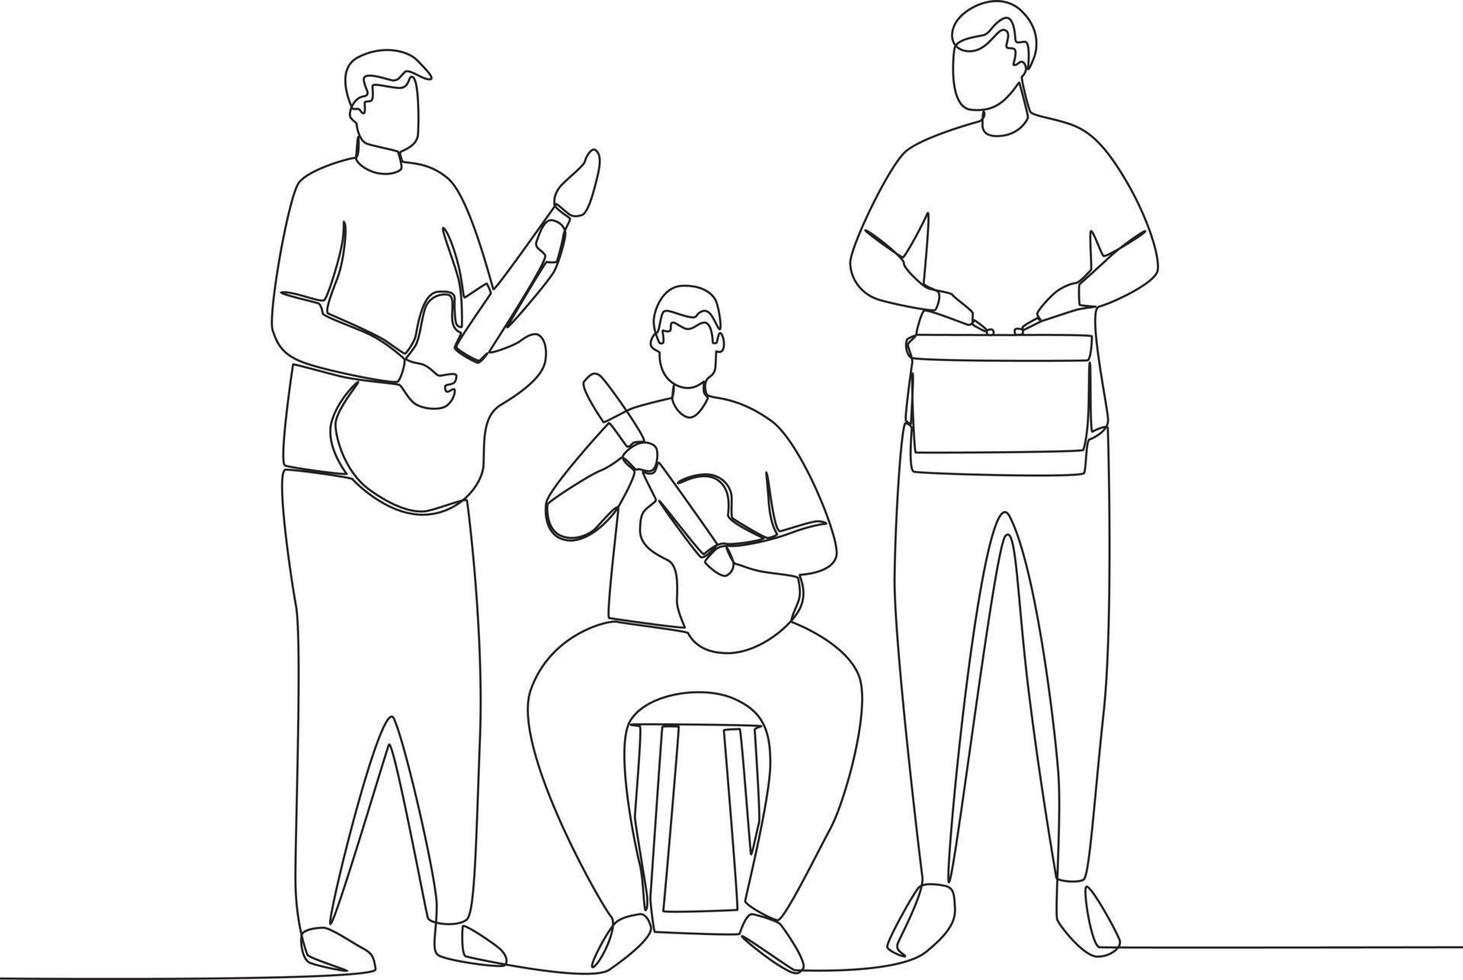 A group of boys playing guitars and drums vector